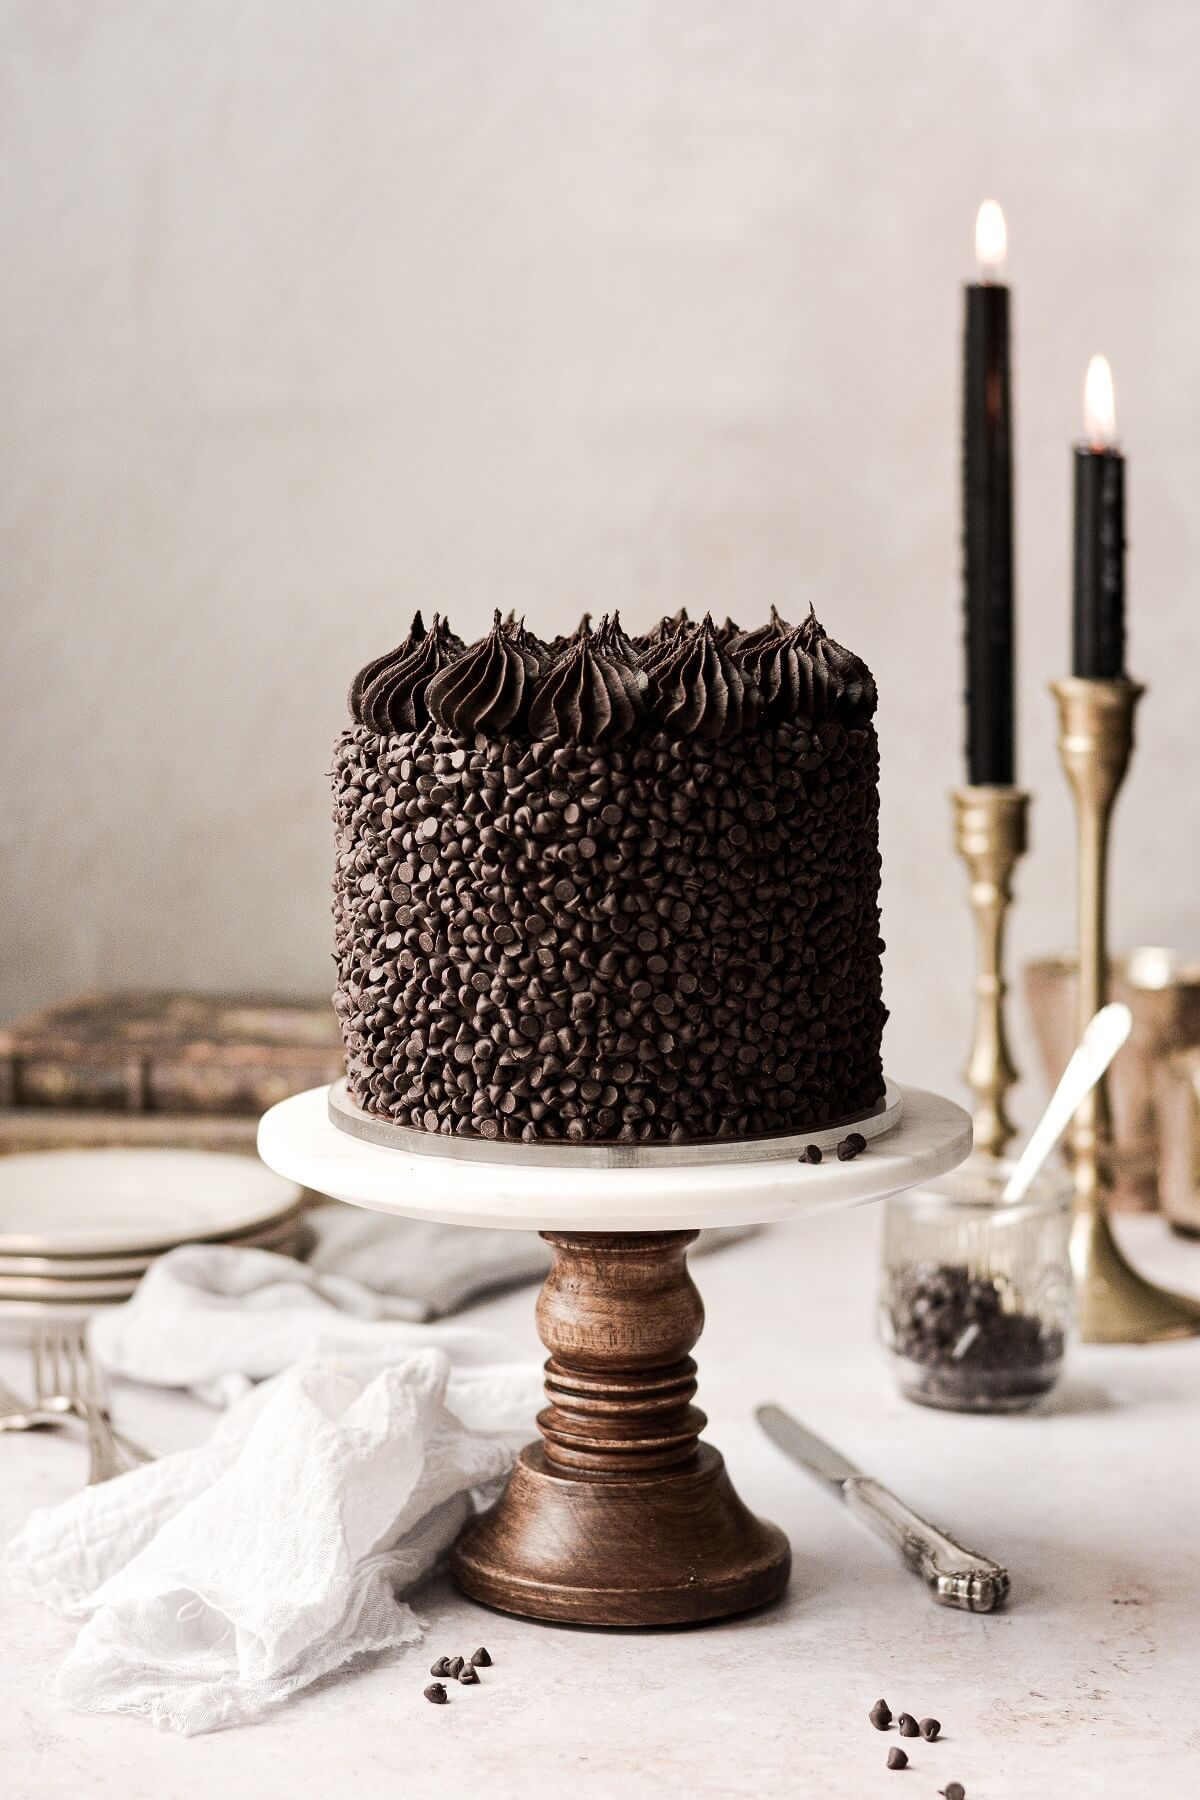 Buy 2 kg EGGLESS Chocolate Truffle Cake Cakes Online - Classicflora.com-sonthuy.vn